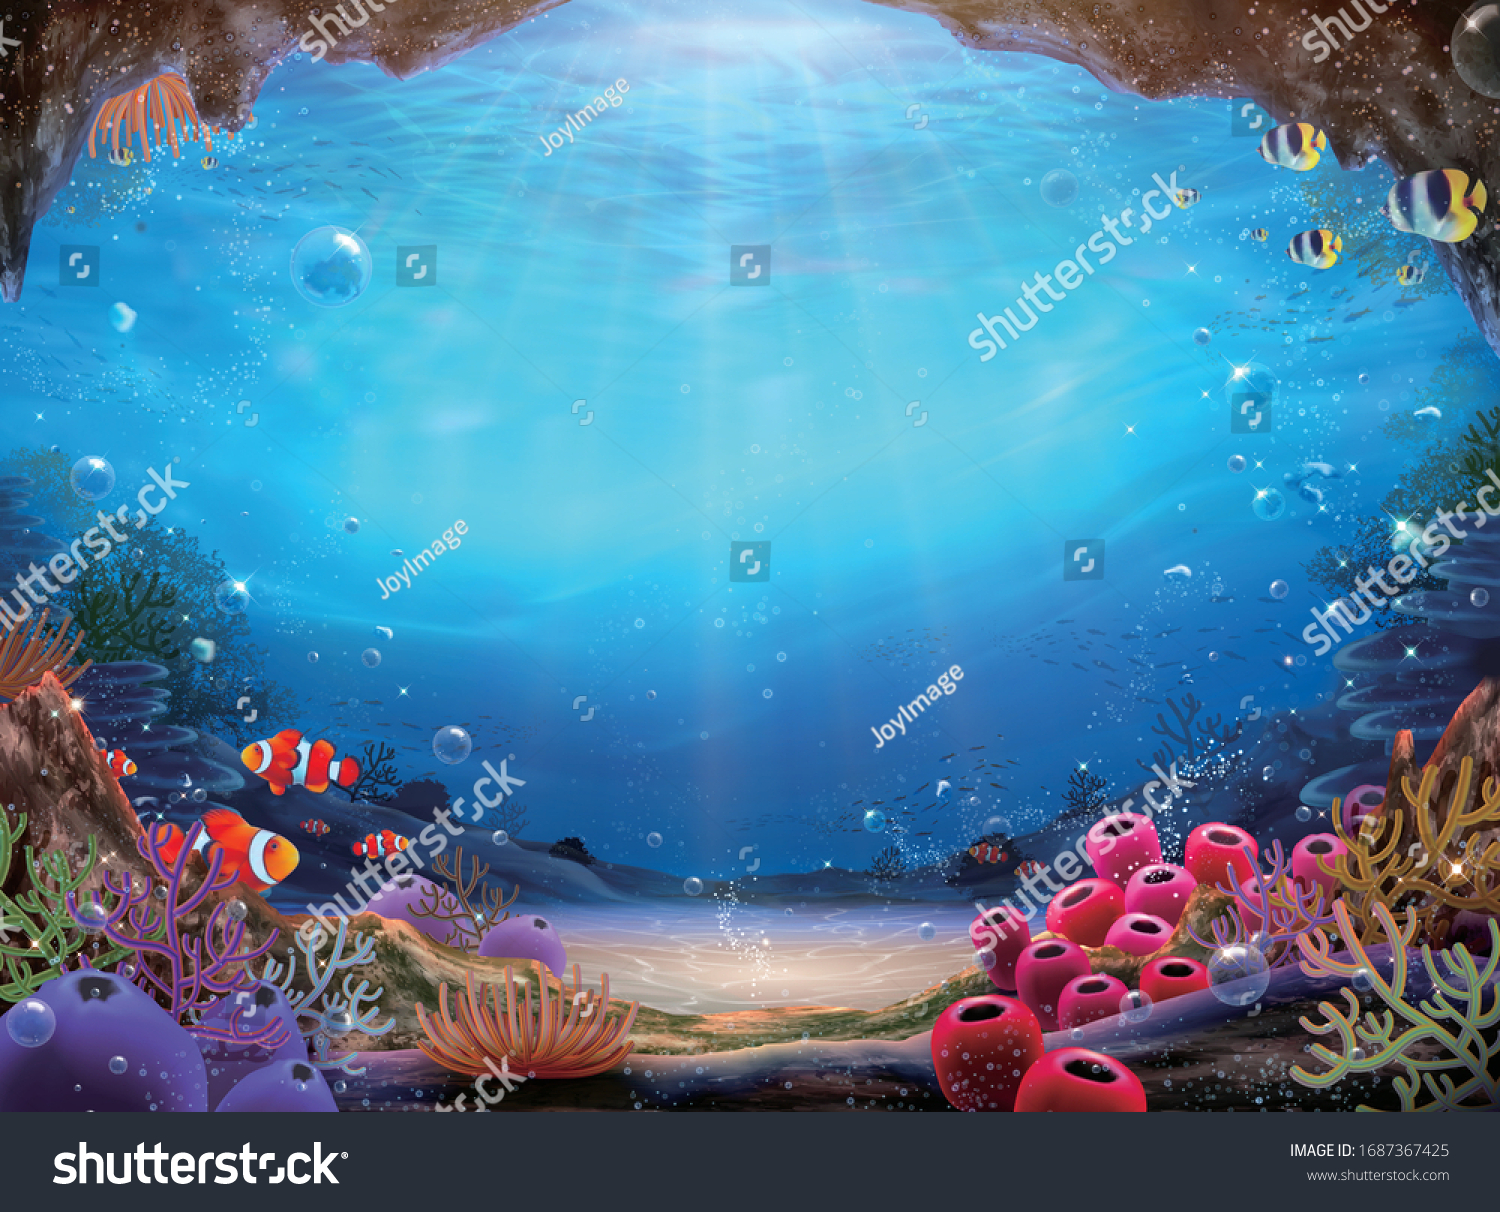 Natural ocean bottom background with colorful coral reef and abundant marine life, 3d illustration #1687367425